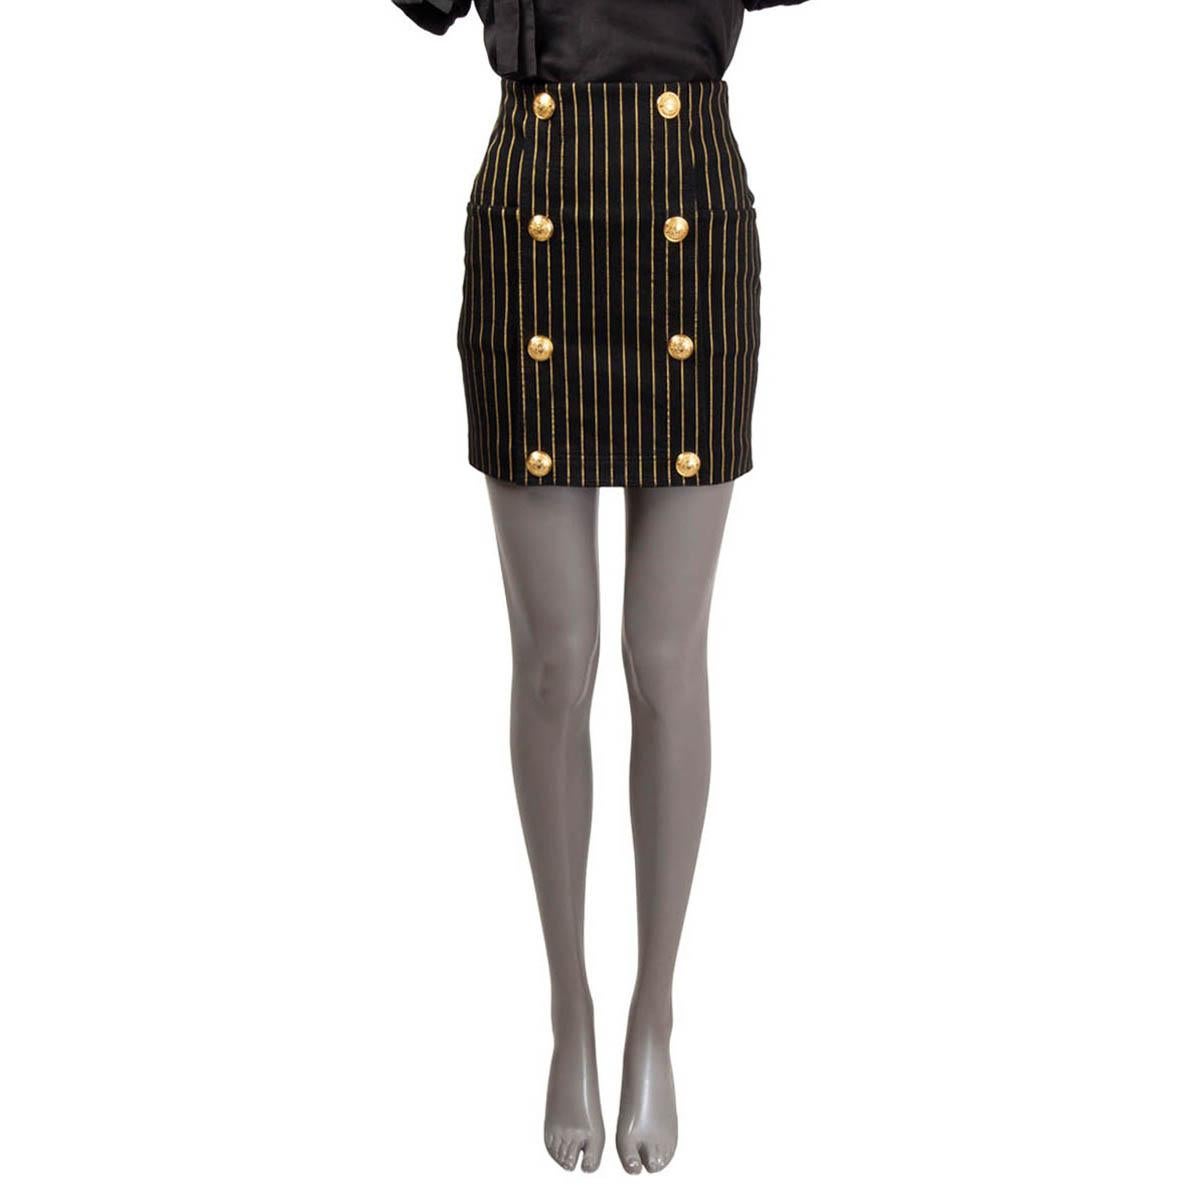 100% authentic Balmain high waisted pinstripe mini skirt in black cotton (98%) and elastane (2%). The design showcases large engraved decorative gold-tone buttons on the front, giving the piece that classic Balmain feel. Side slit pockets and a